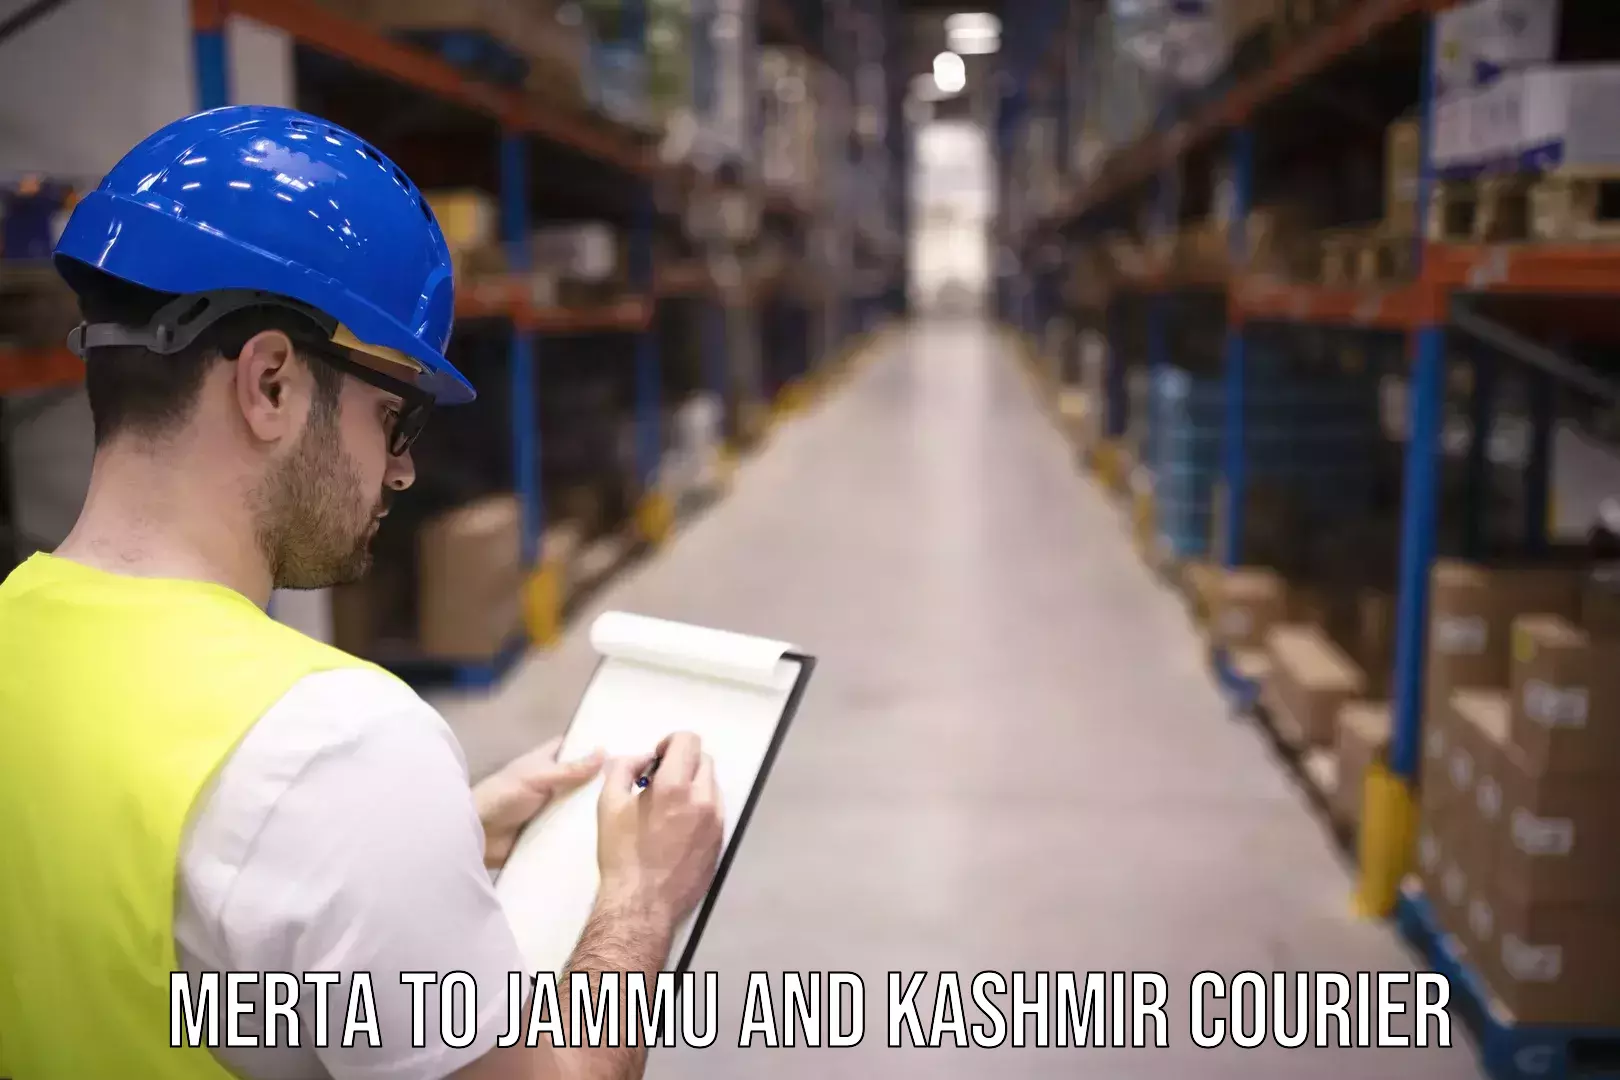 Global courier networks Merta to Jammu